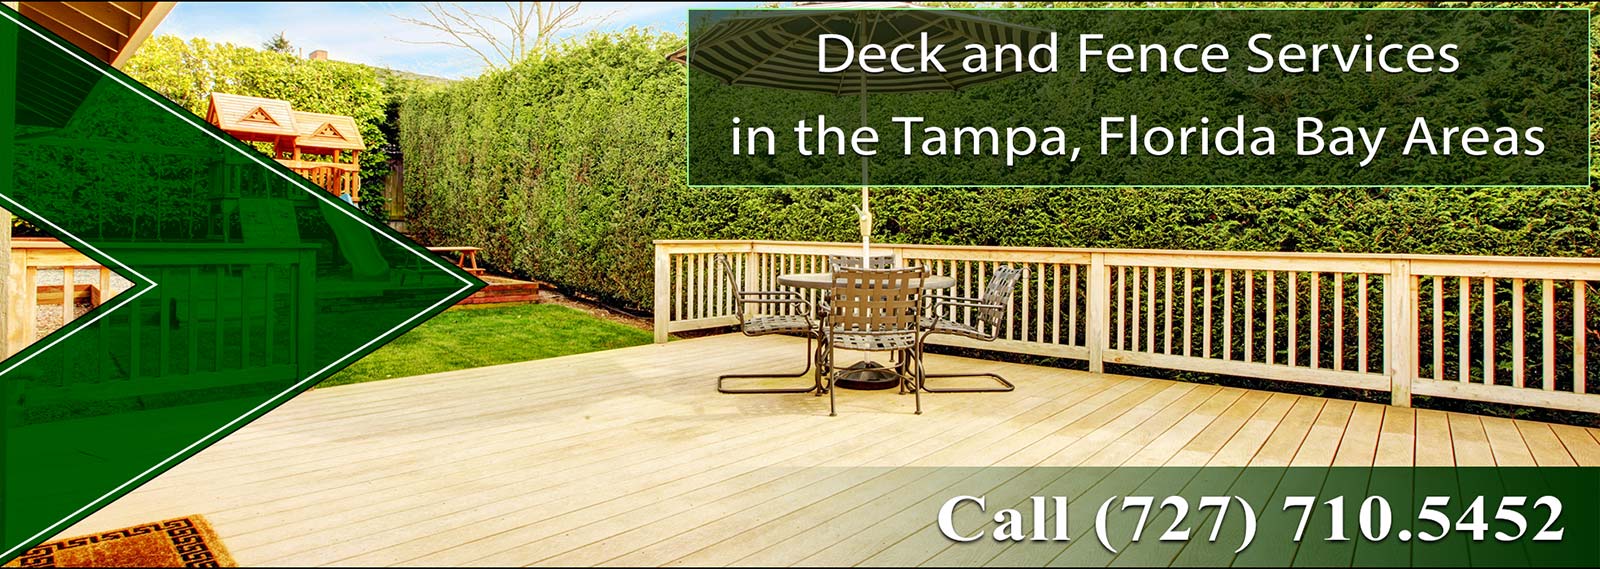 Tampa Bay Deck and Fence